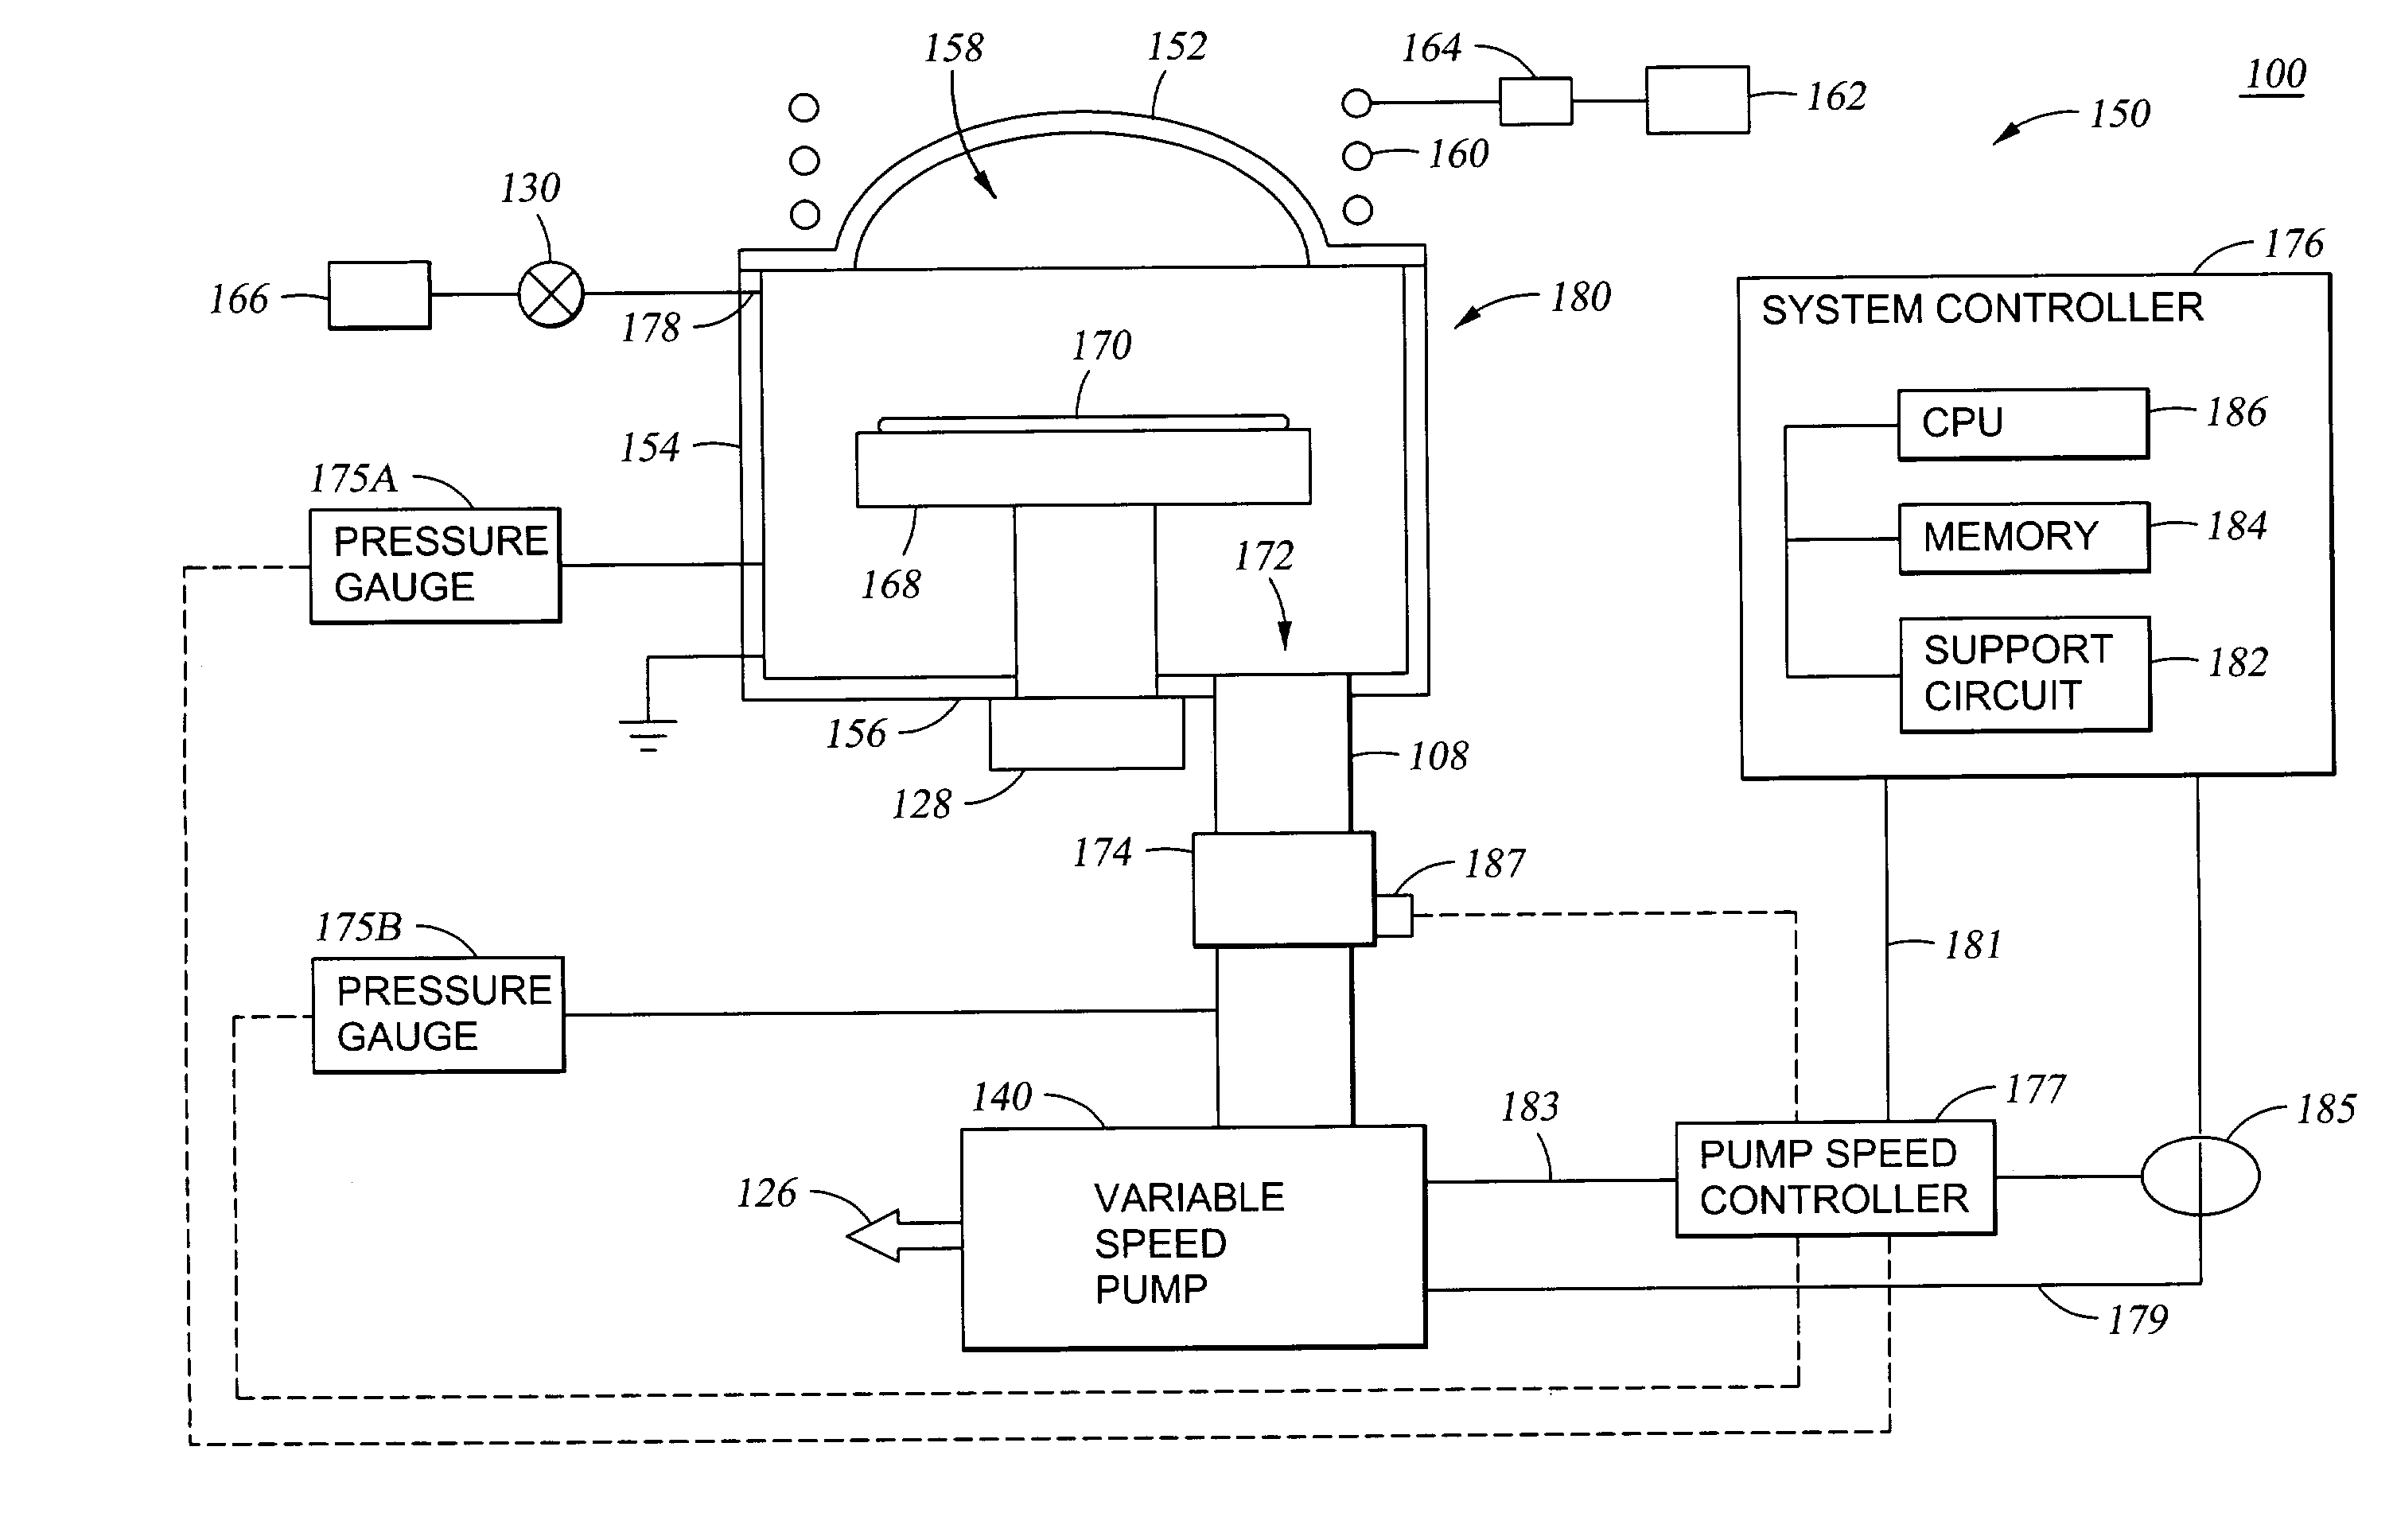 Variable speed pump control